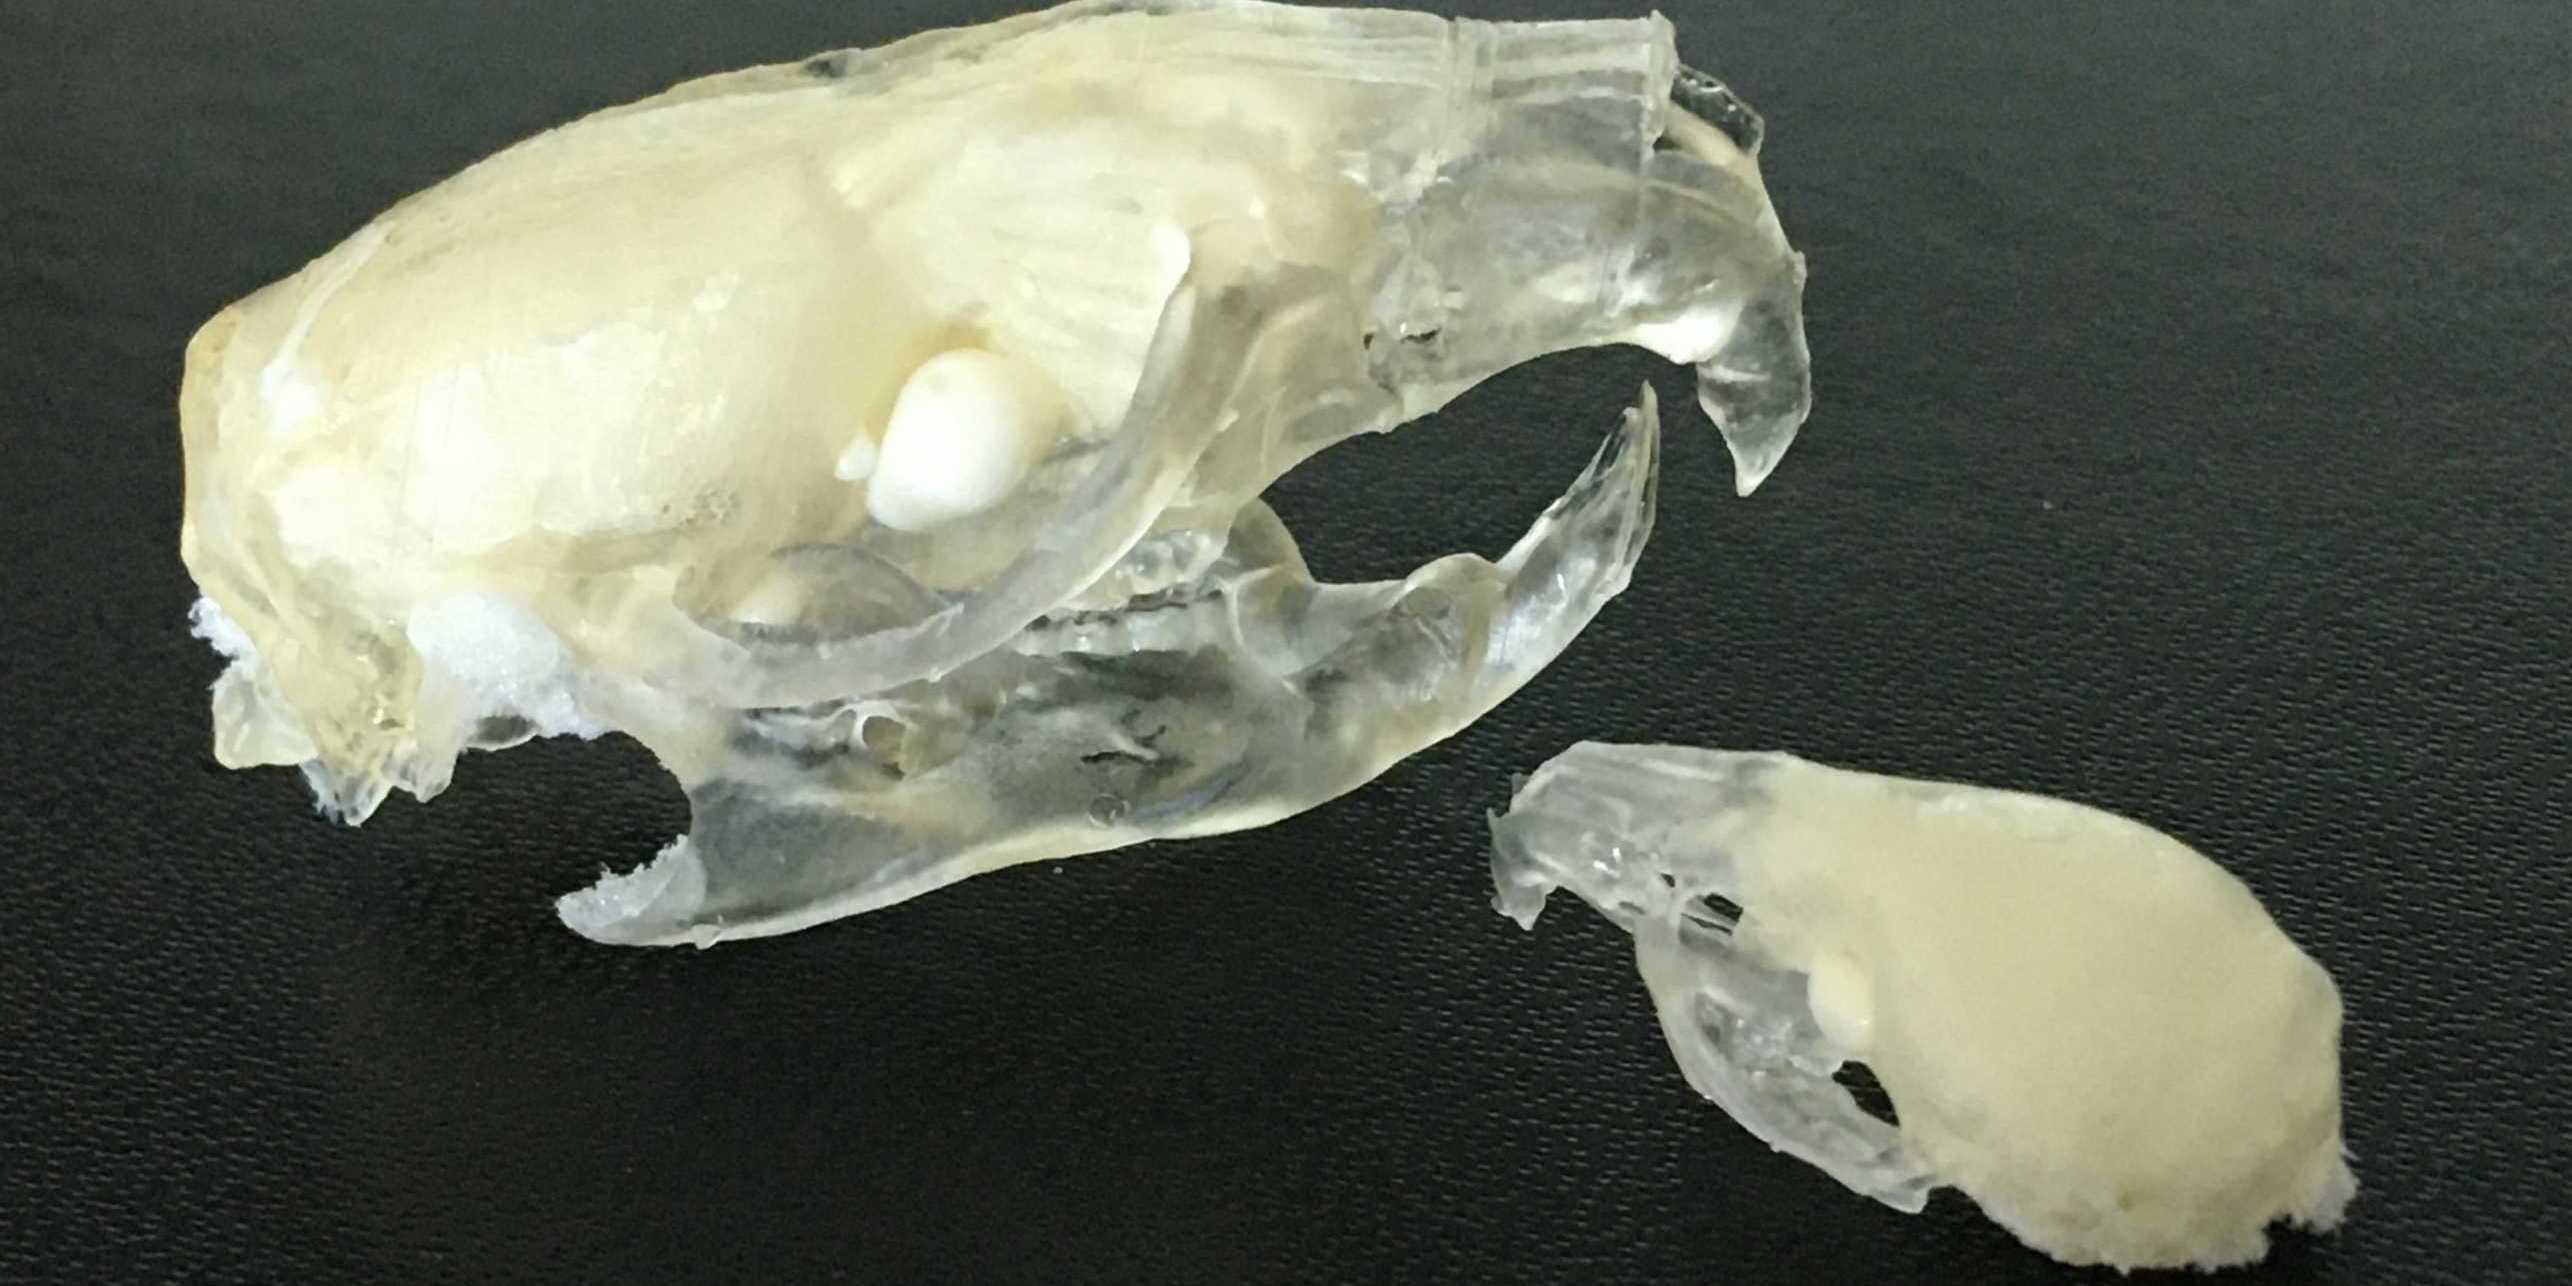 Finished resin model of a rat (left) and mouse skull (right) filled with insulating foam. Transparent resin was used. 